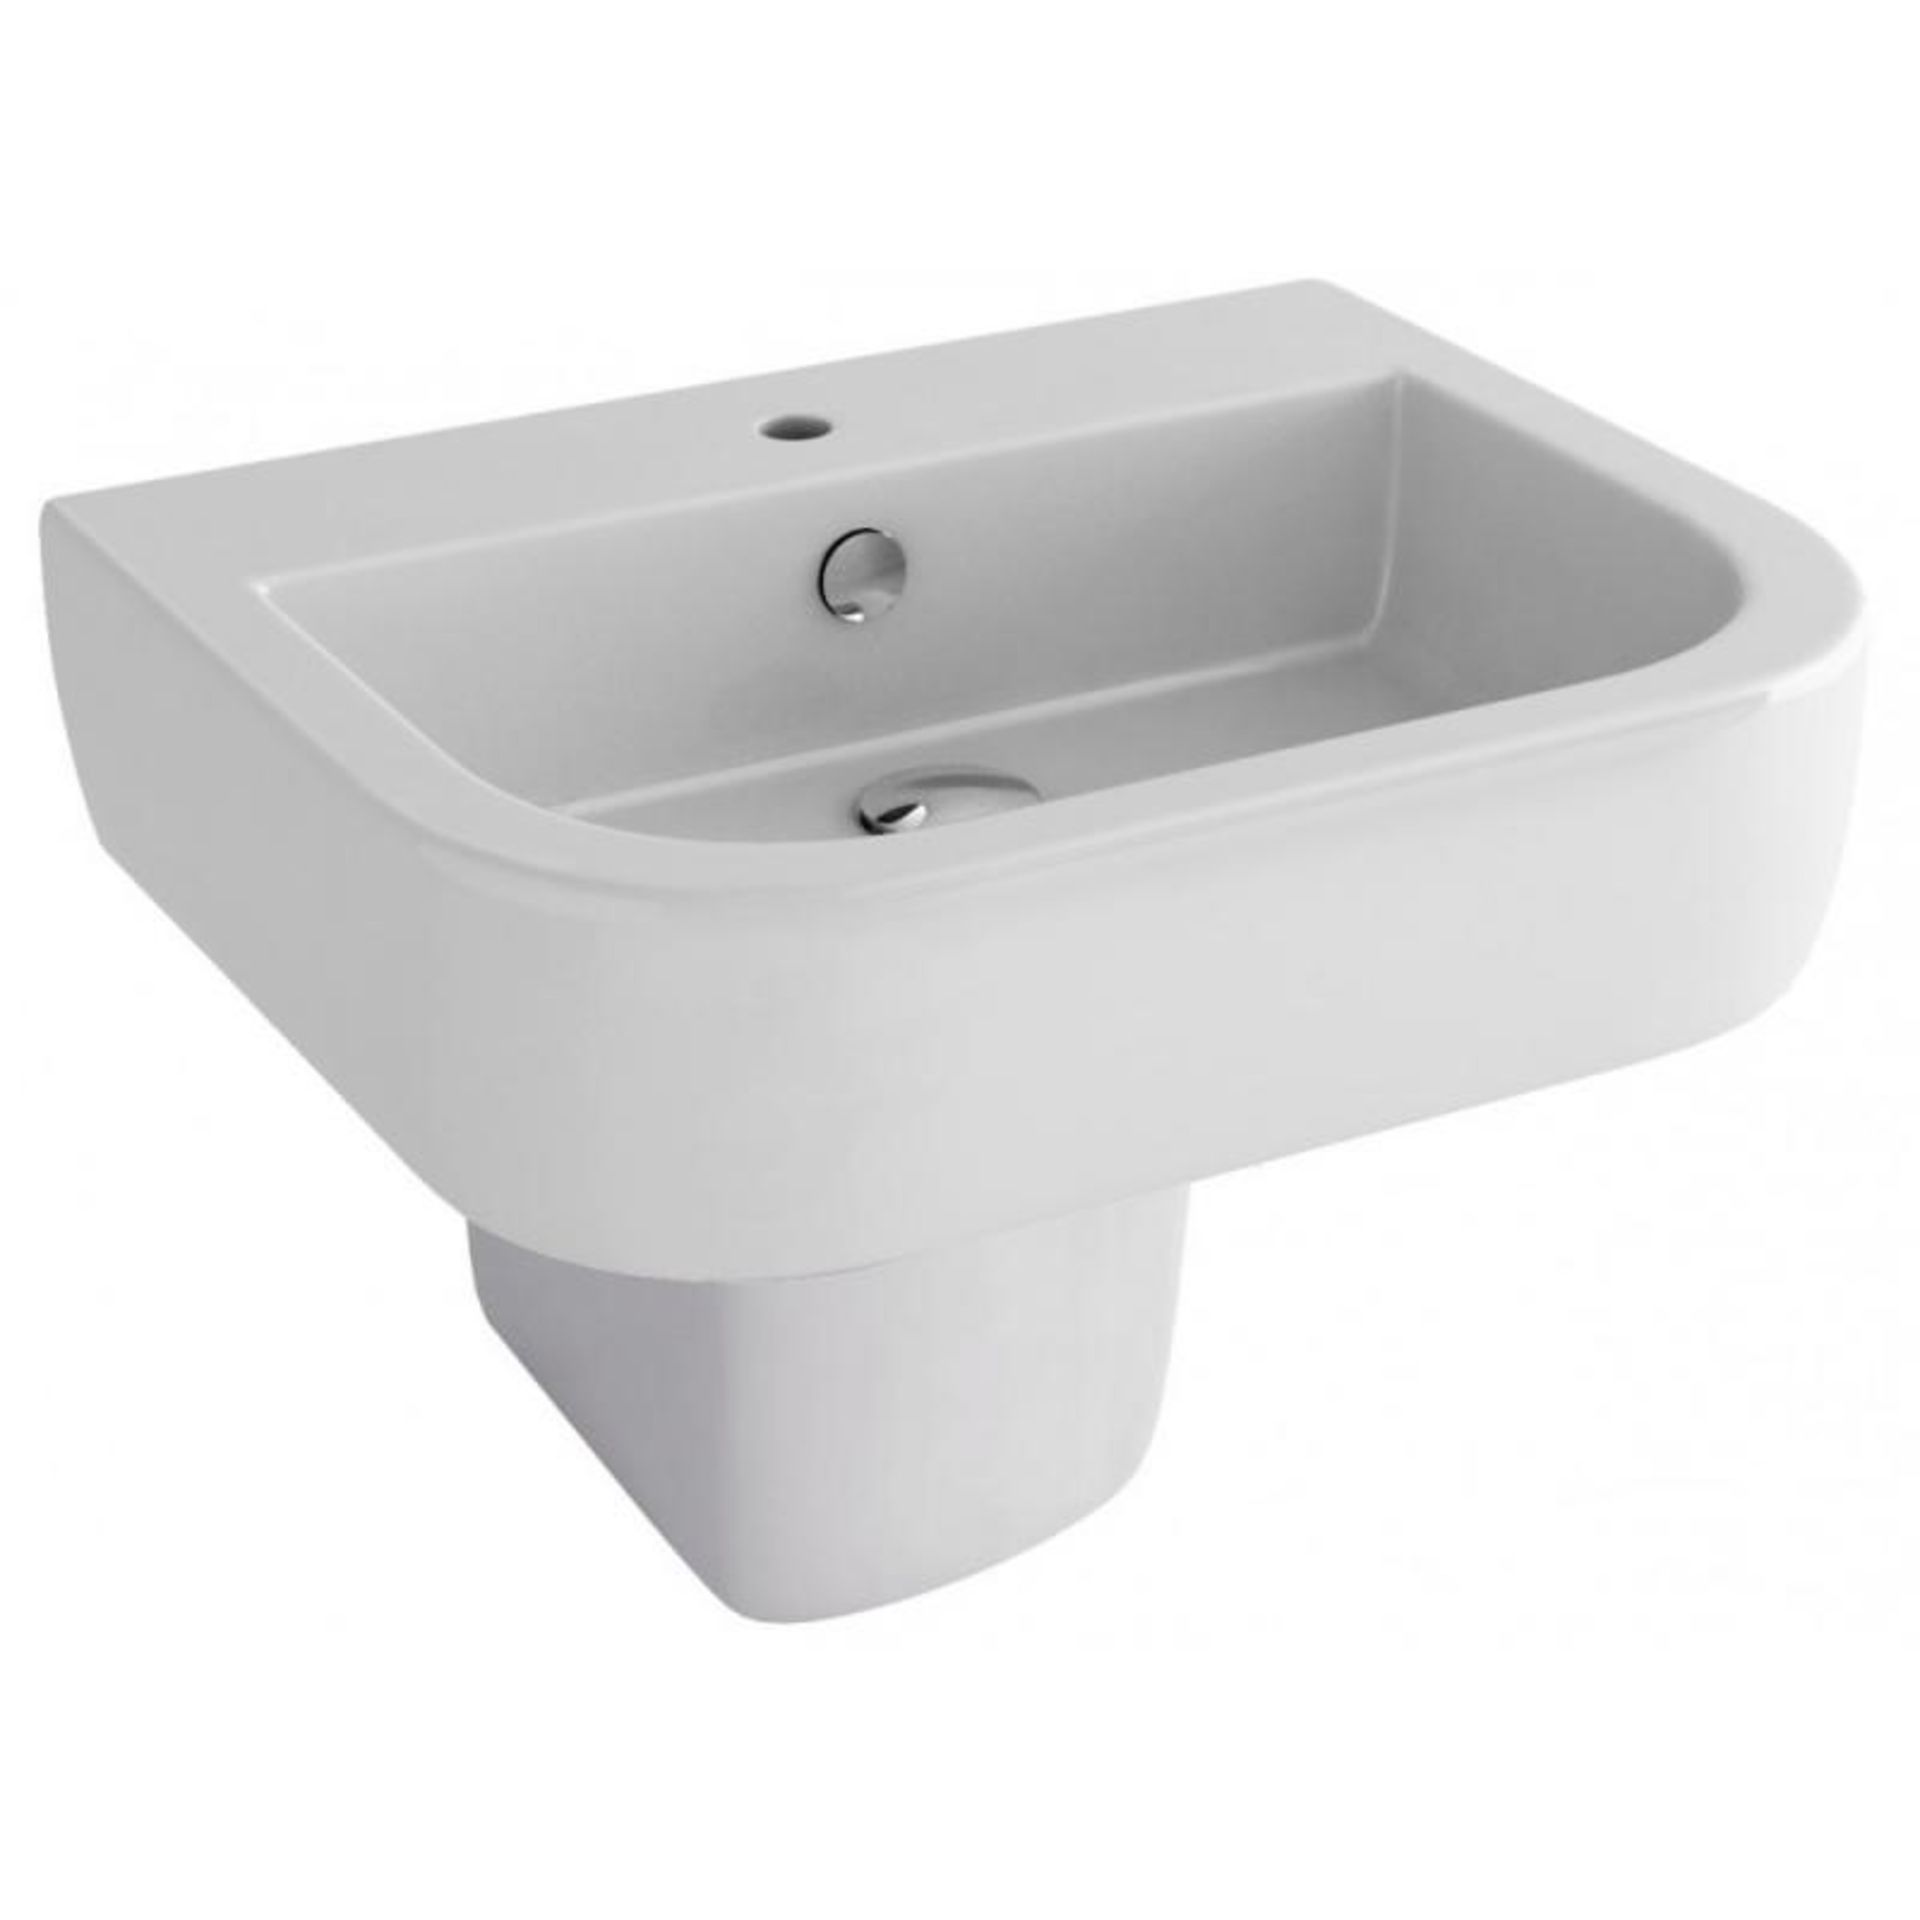 1 x Essence 560mm Basin With One Tap Hole (No Pedestal) - Ref: DY110/L10100 - CL190 - Unused Stock -